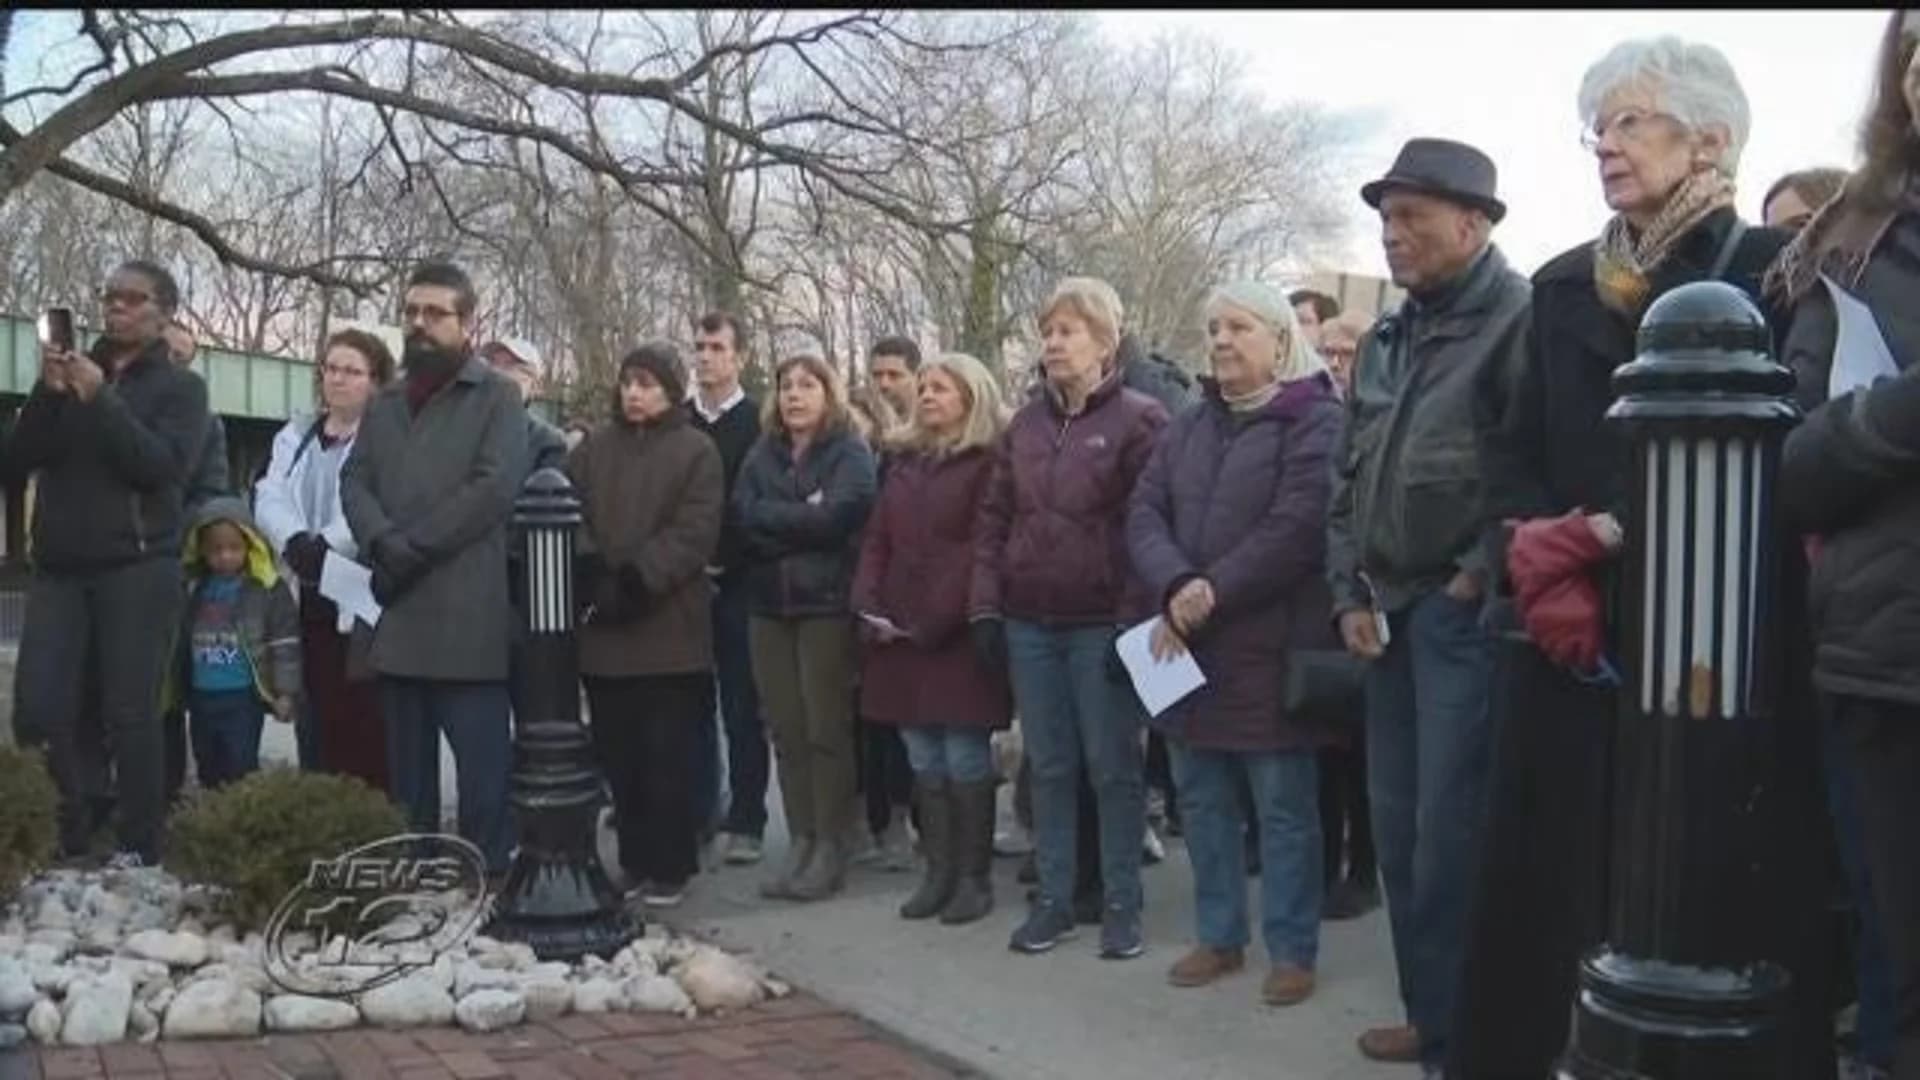 New Jersey community comes together to condemn hate in wake of New Zealand attack